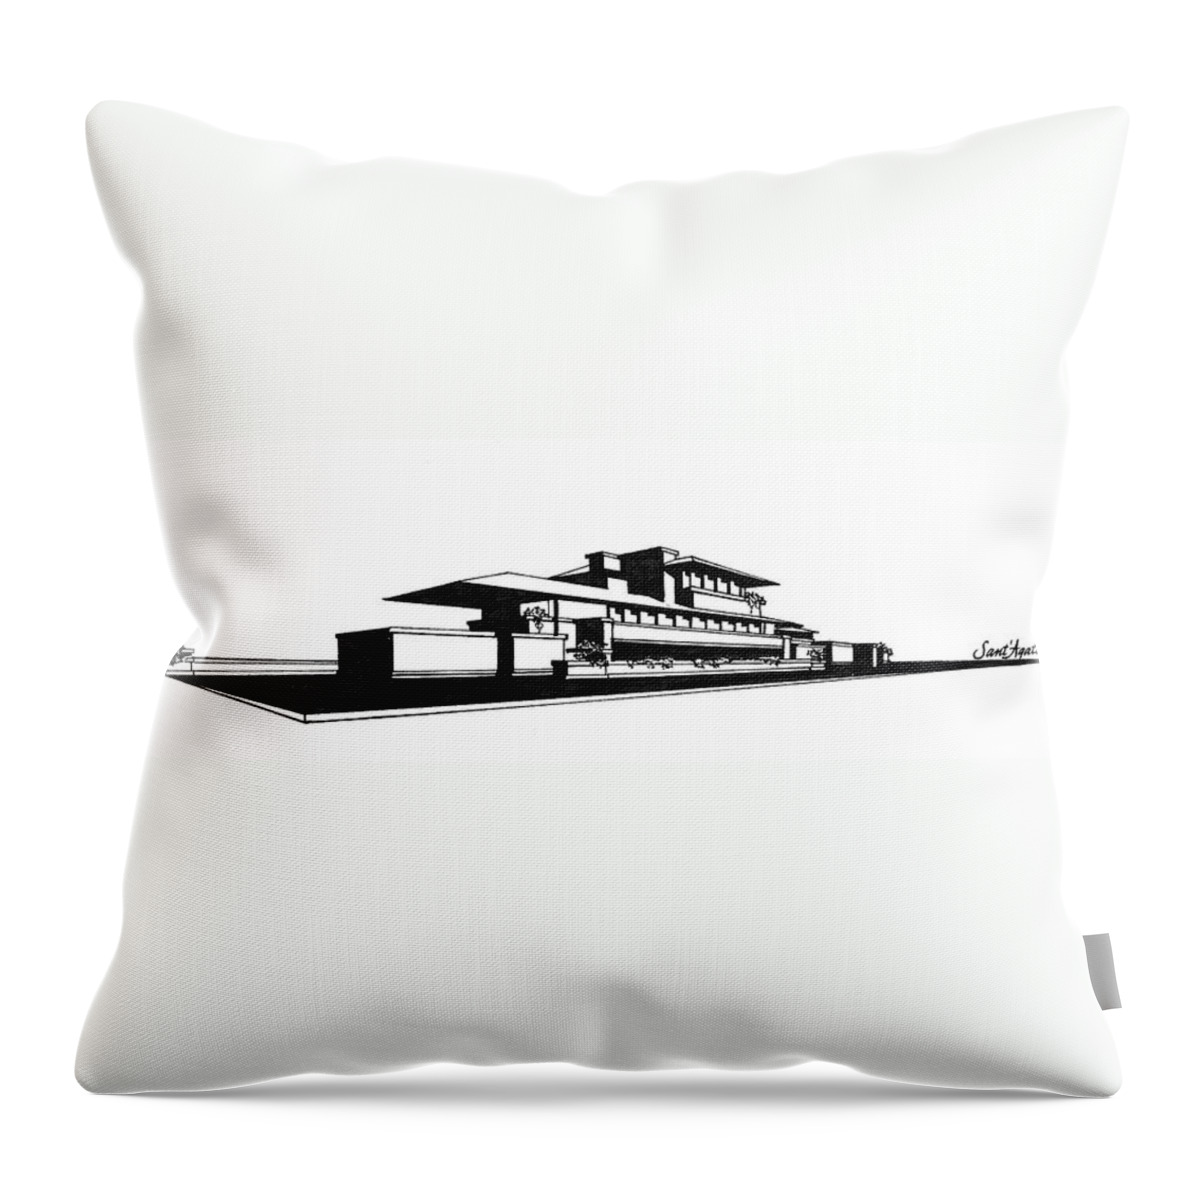 Frank Throw Pillow featuring the drawing Frank Lloyd Wright's Robie House by Frank SantAgata